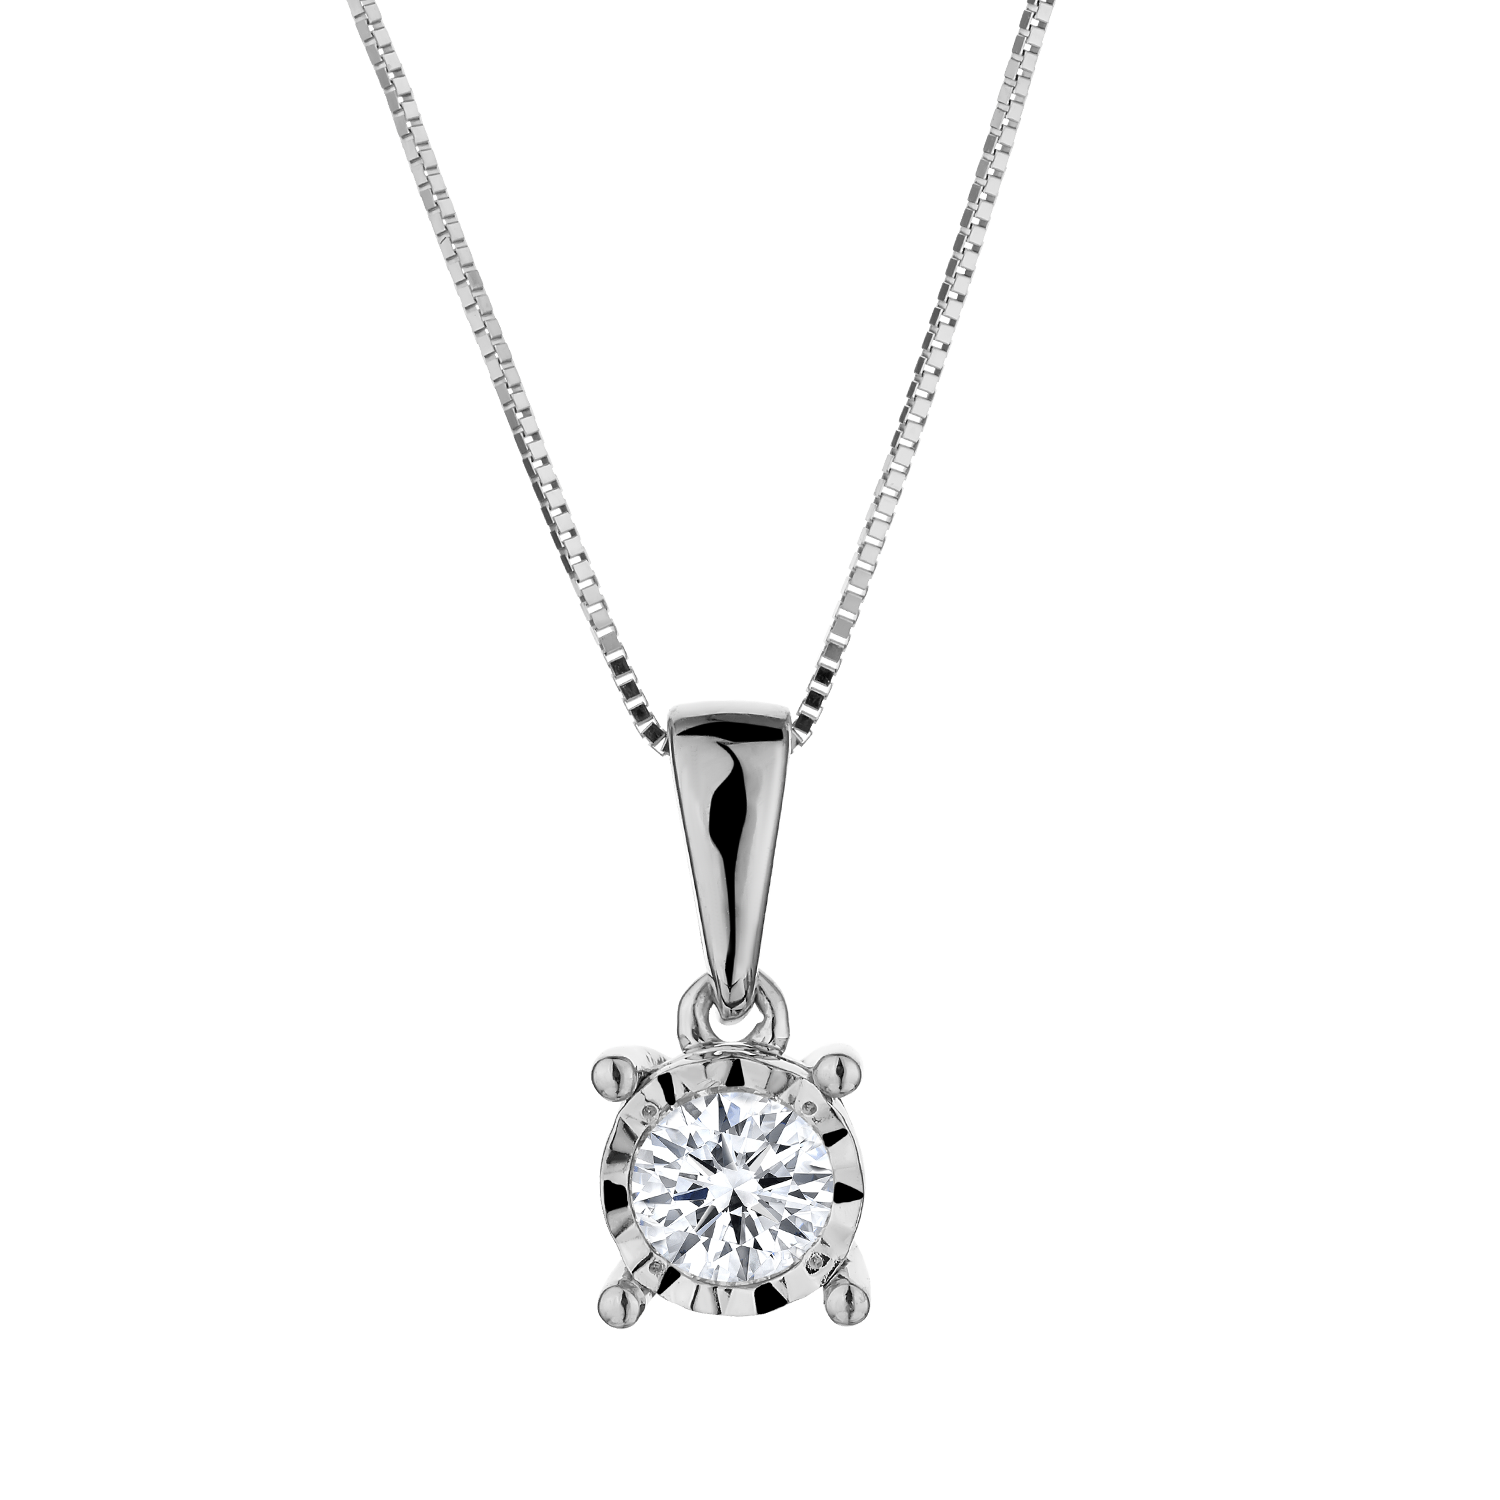 14kt White Gold  .05 Carat of Diamond "Miracle" Pendant  Goes along with the 10kt White Gold Chain.